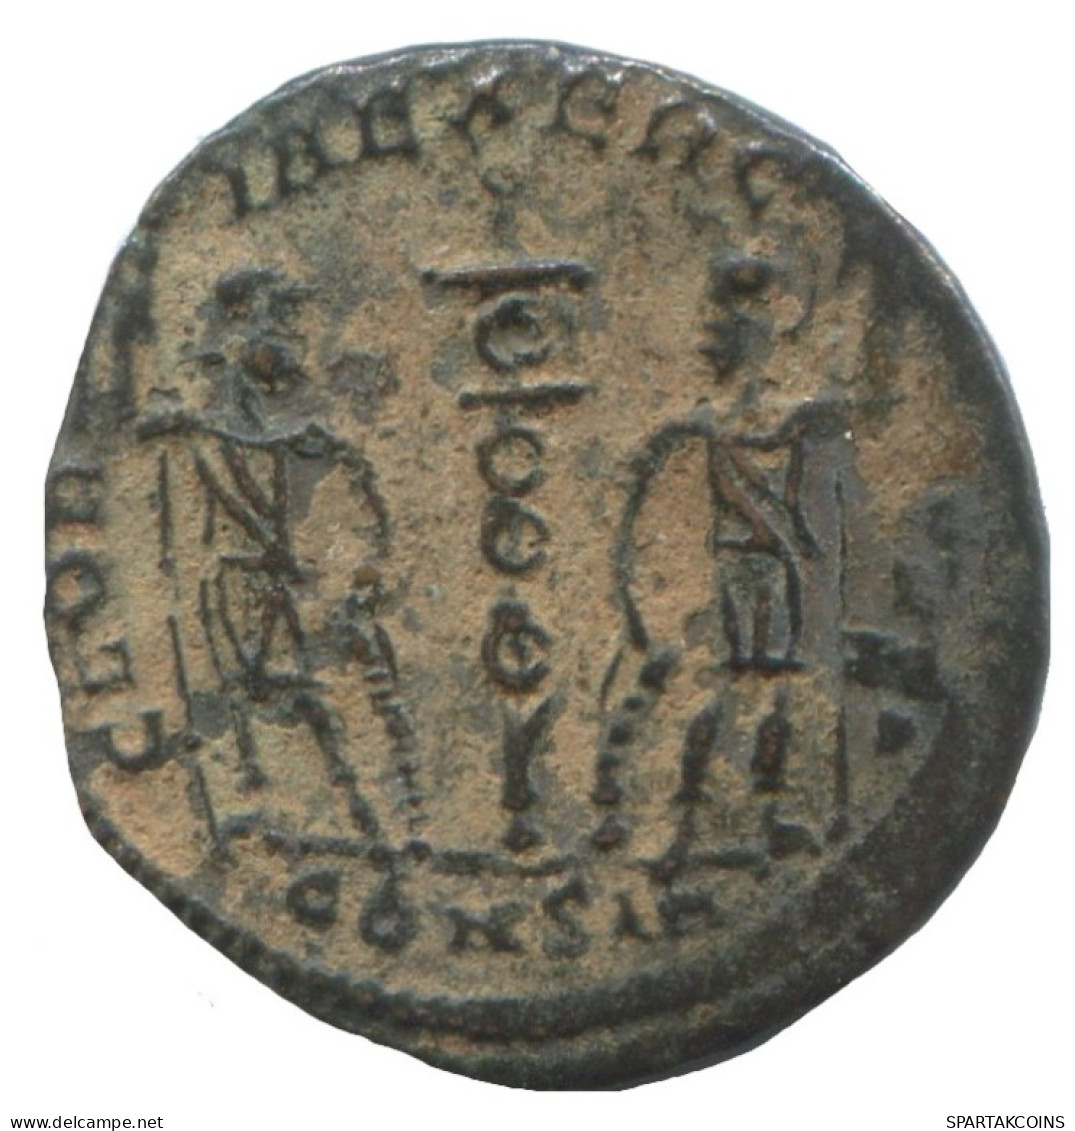 CONSTANS CONSTANTINOPLE CONS GLORIA EXERCITVS TWO SOLD. 1.1g/16m #ANN1416.10.D.A - The Christian Empire (307 AD To 363 AD)